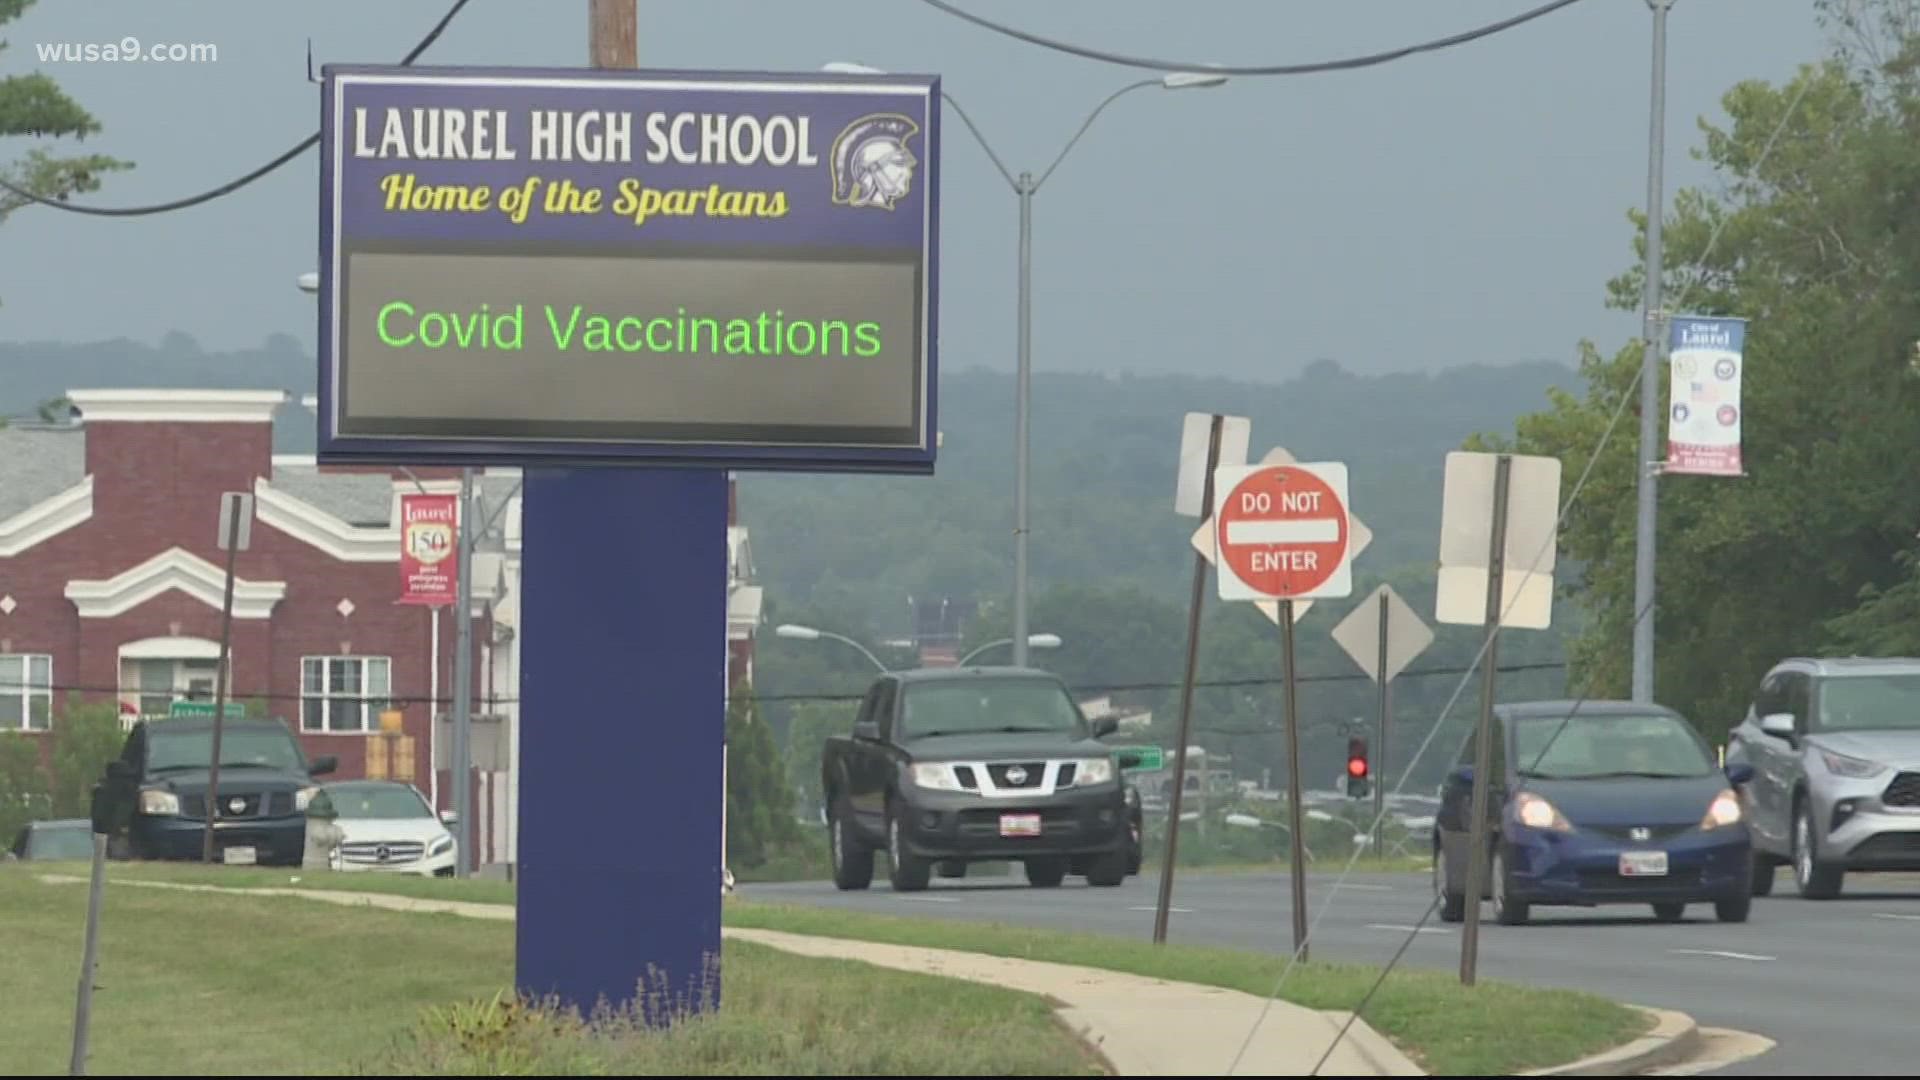 On Thursday, some who attended a vaccination event at Laurel High School noted how small the crowd was.